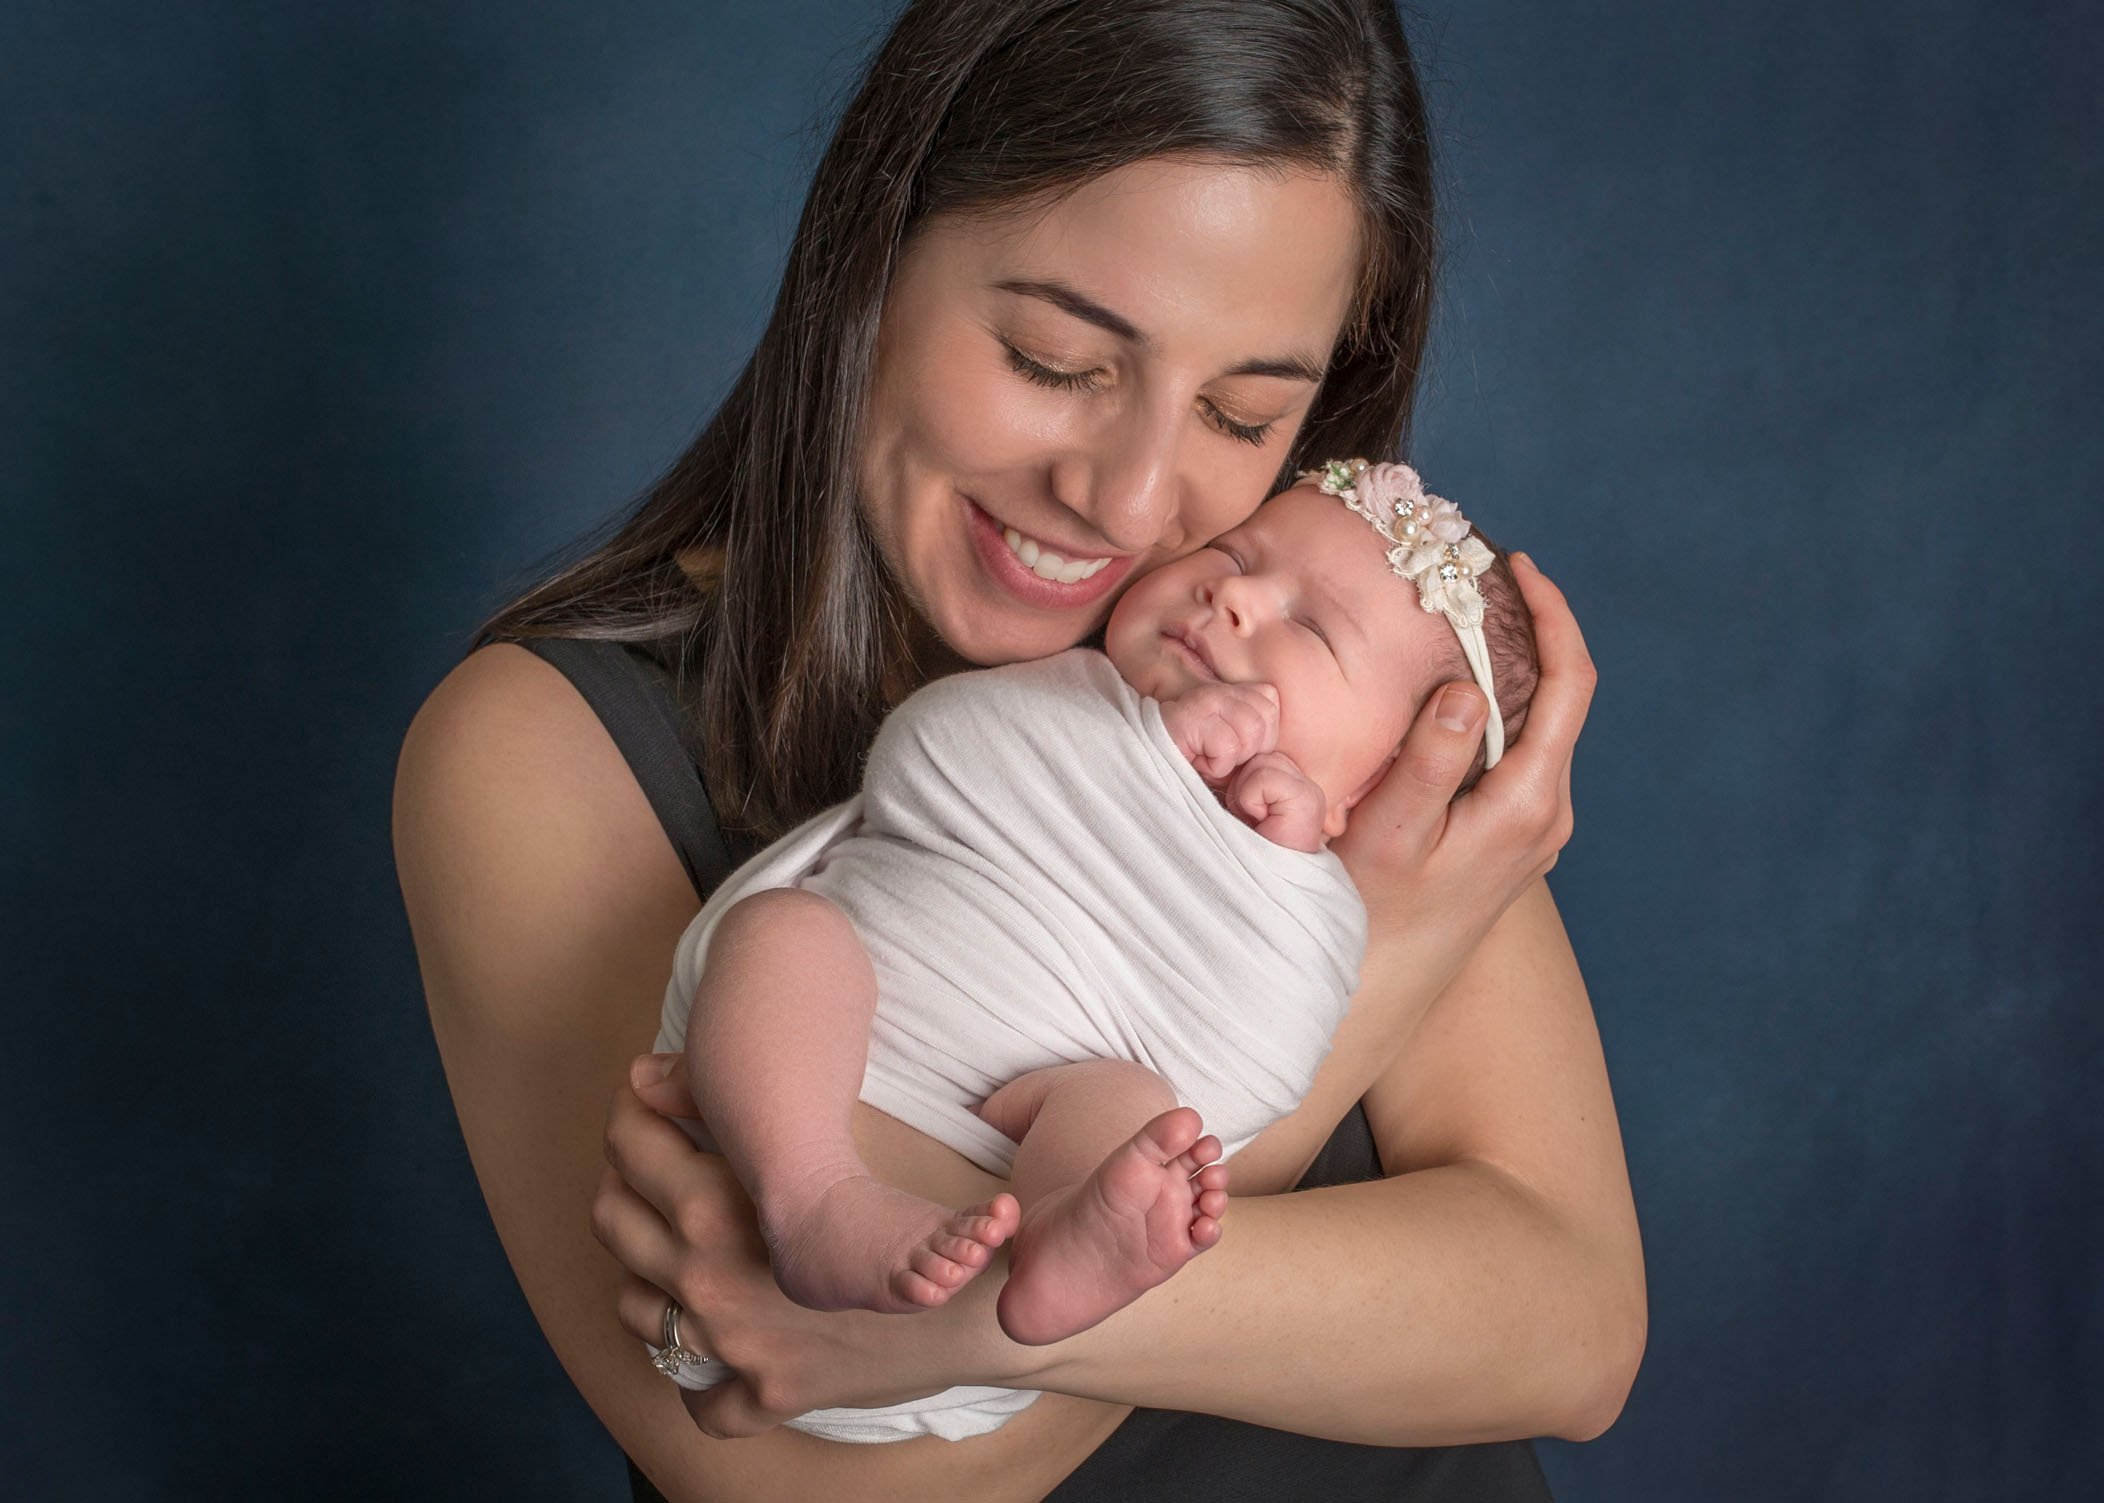 Mom cuddling newborn close to her face and smiling